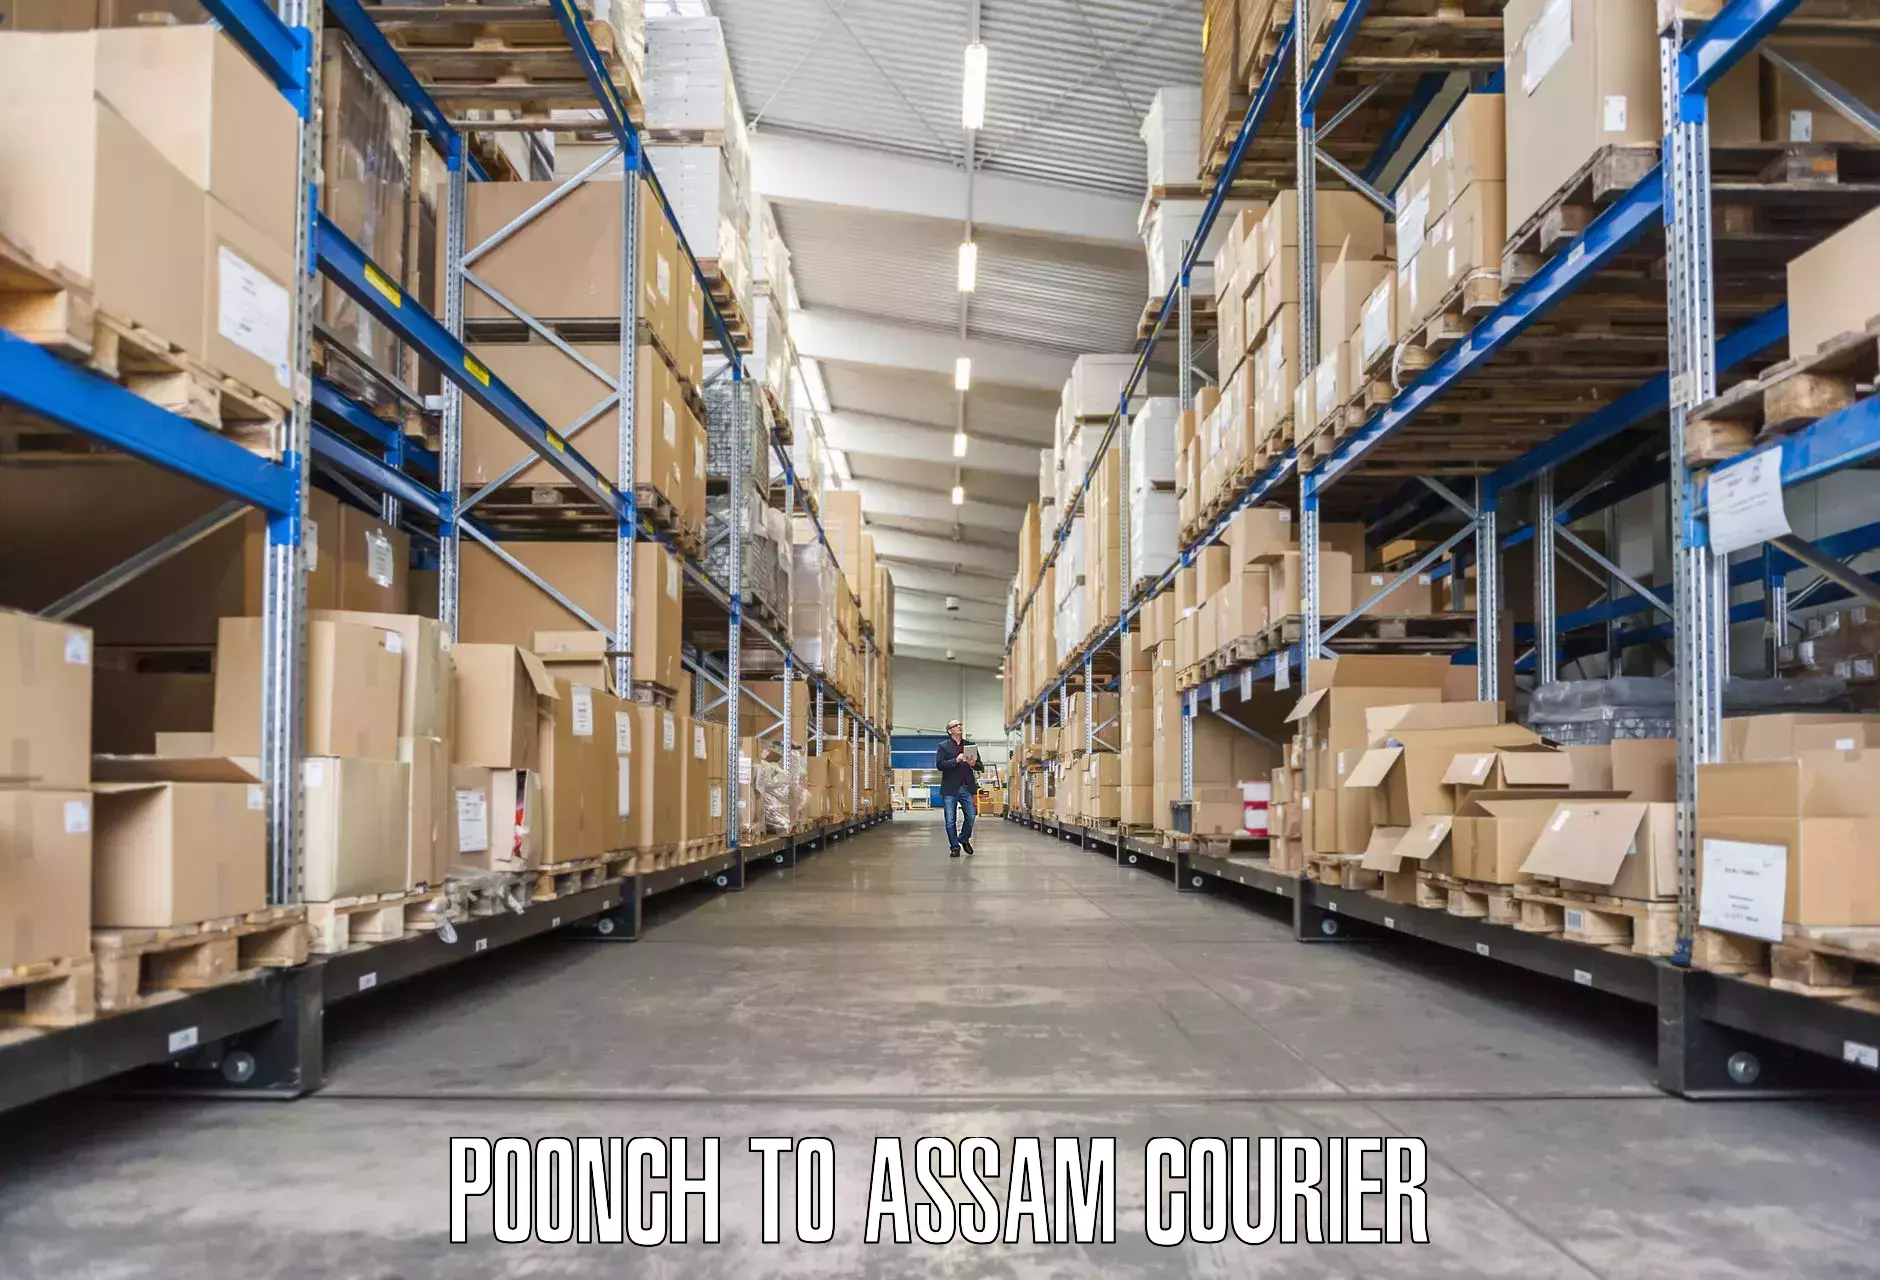 Budget-friendly movers Poonch to Assam